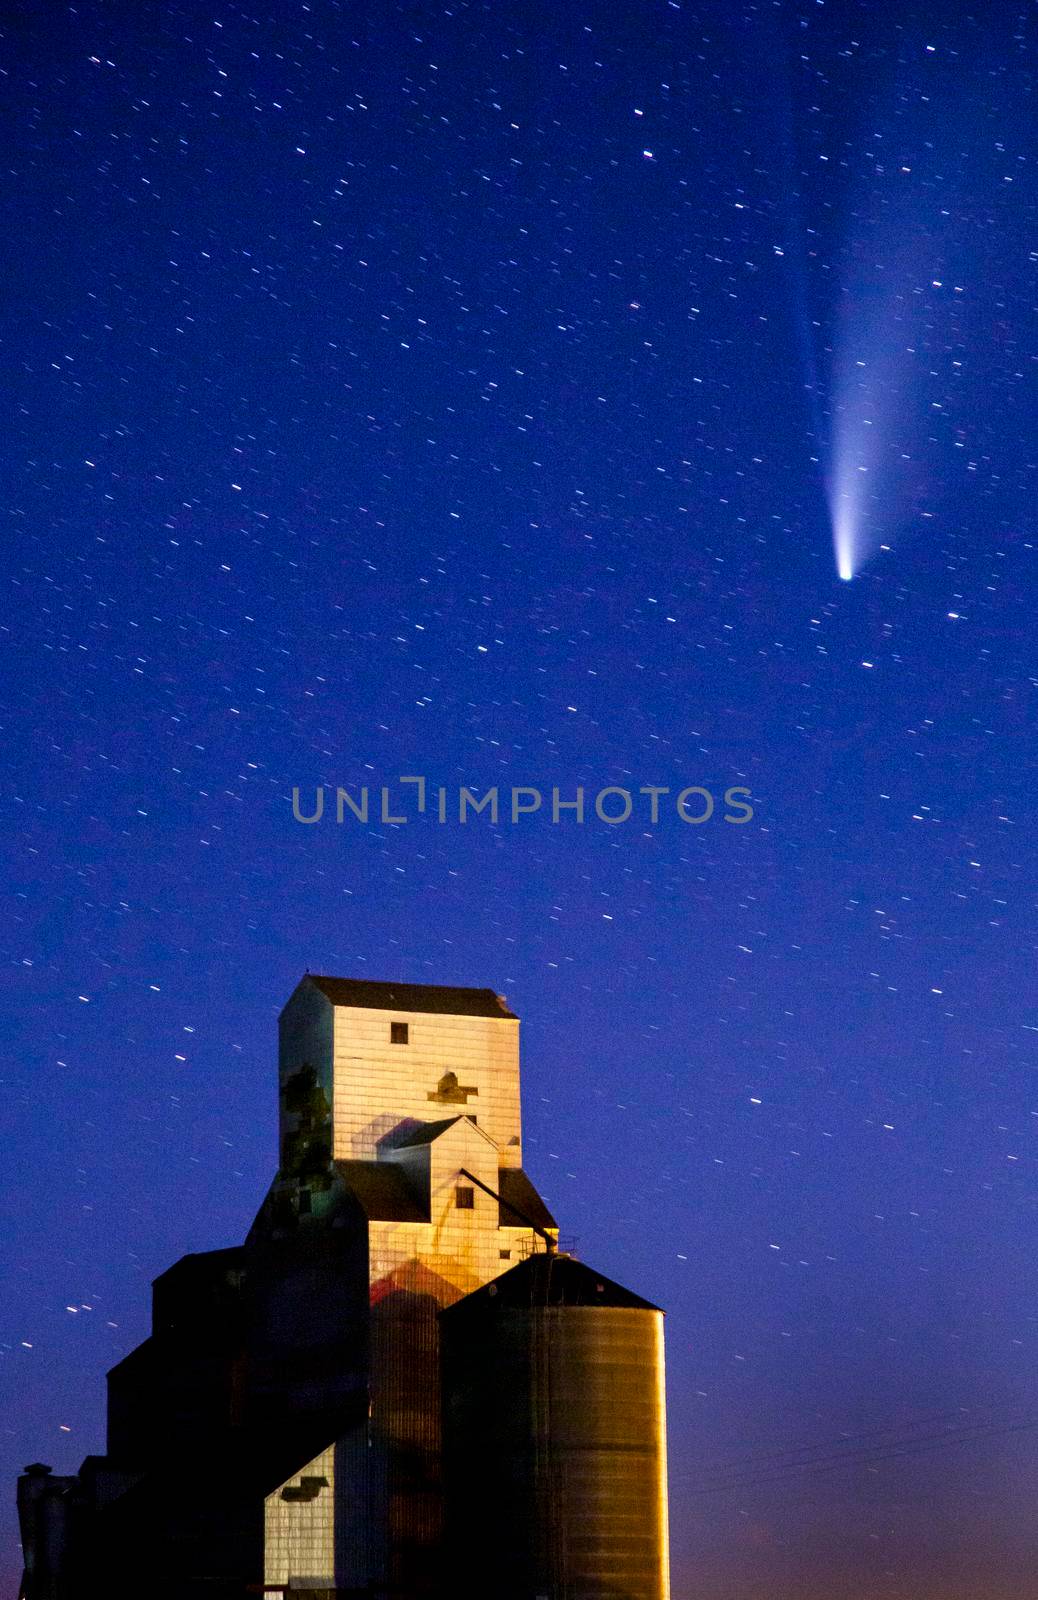 Neowise Comet and Grain Elevator by pictureguy